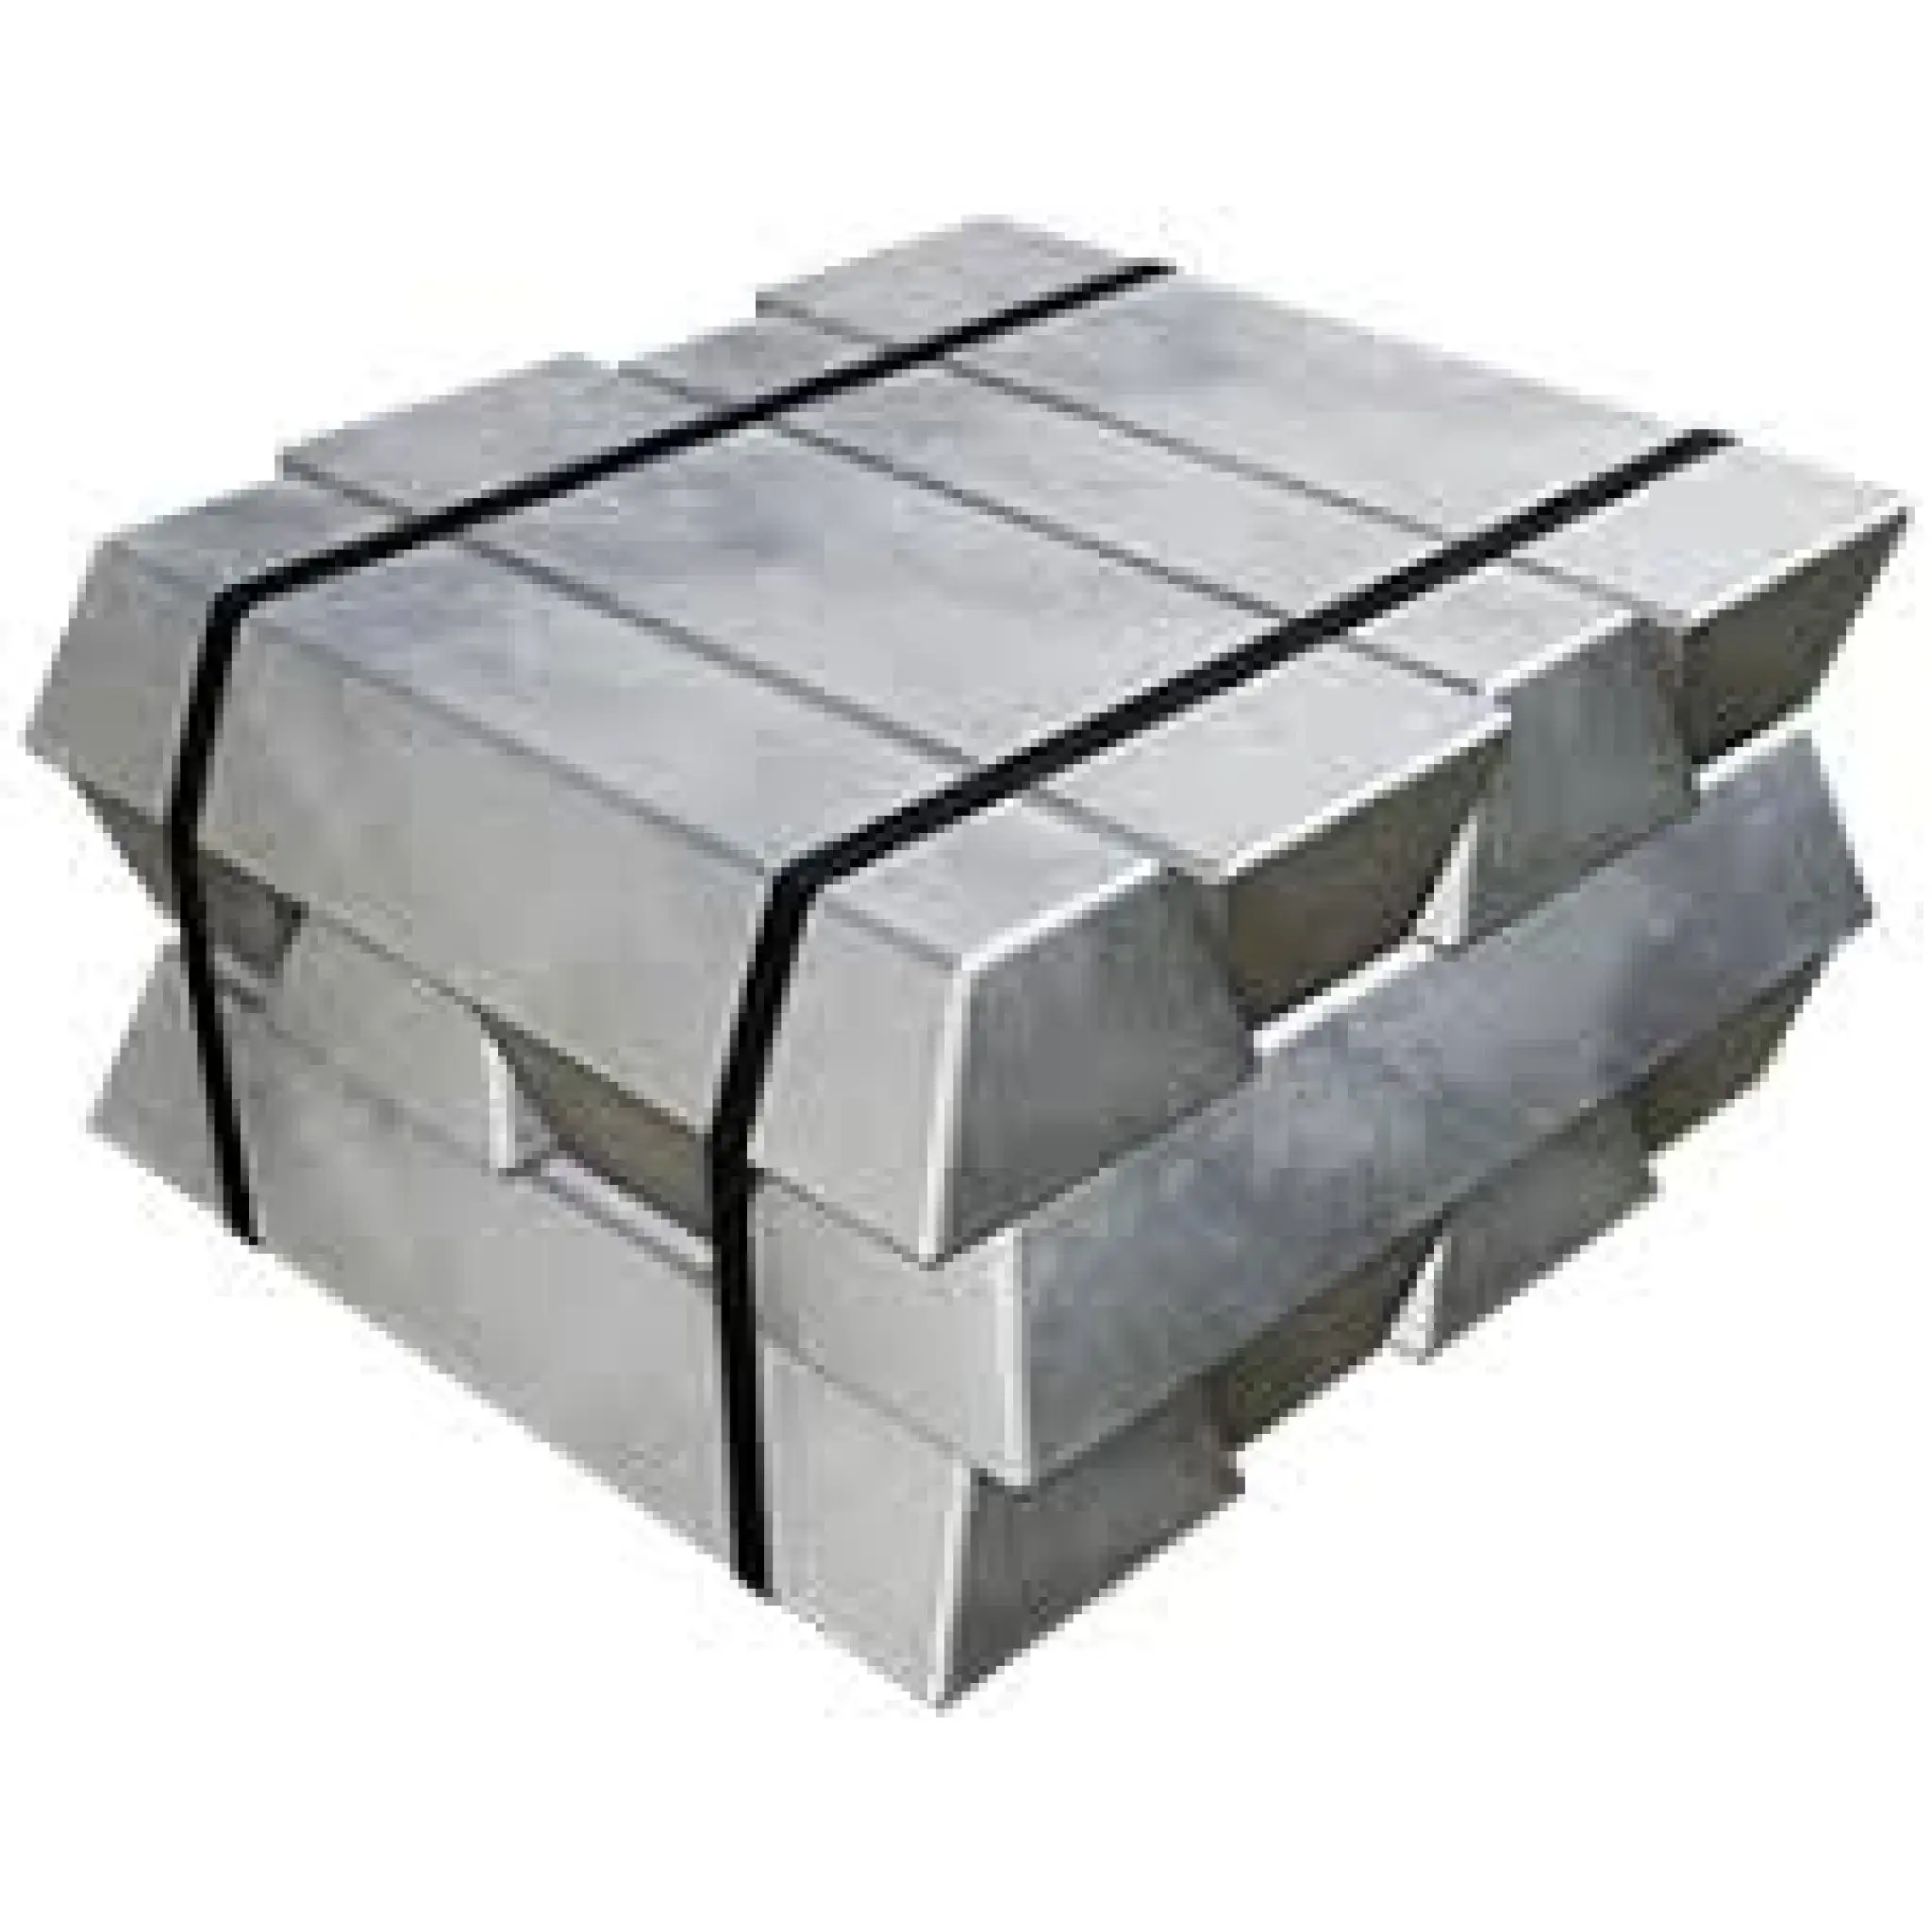 Manufacture Of Aluminum Ingots And Granules Intended For Deoxidation Indonesia Buyer